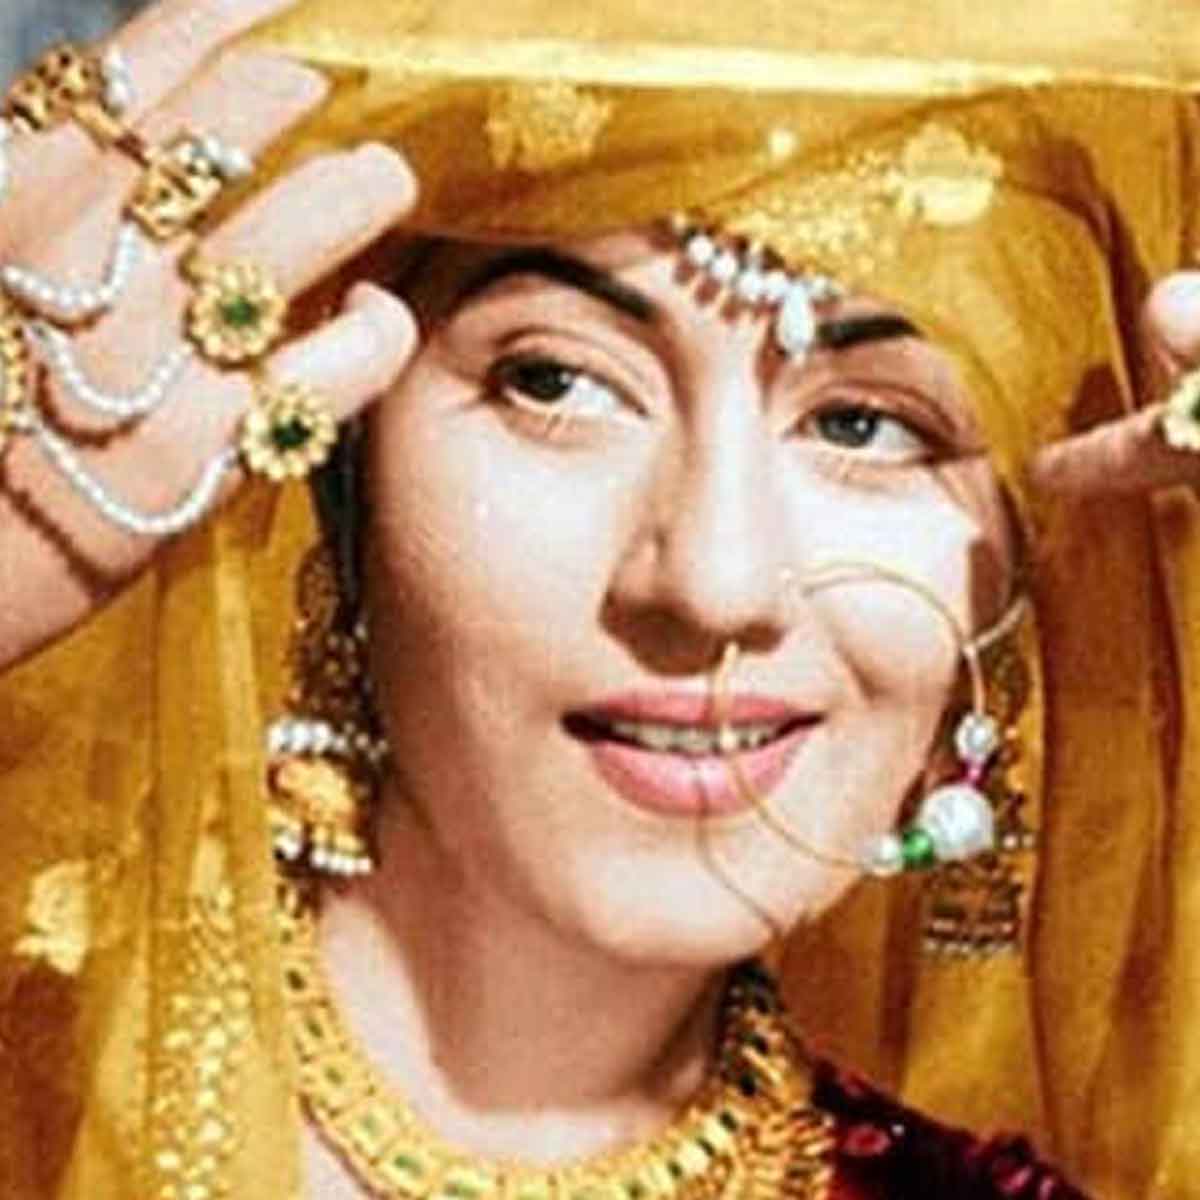 EXCLUSIVE: Madhubala biopic set to take off; Her youngest sister teams up with Shaktimaan producers